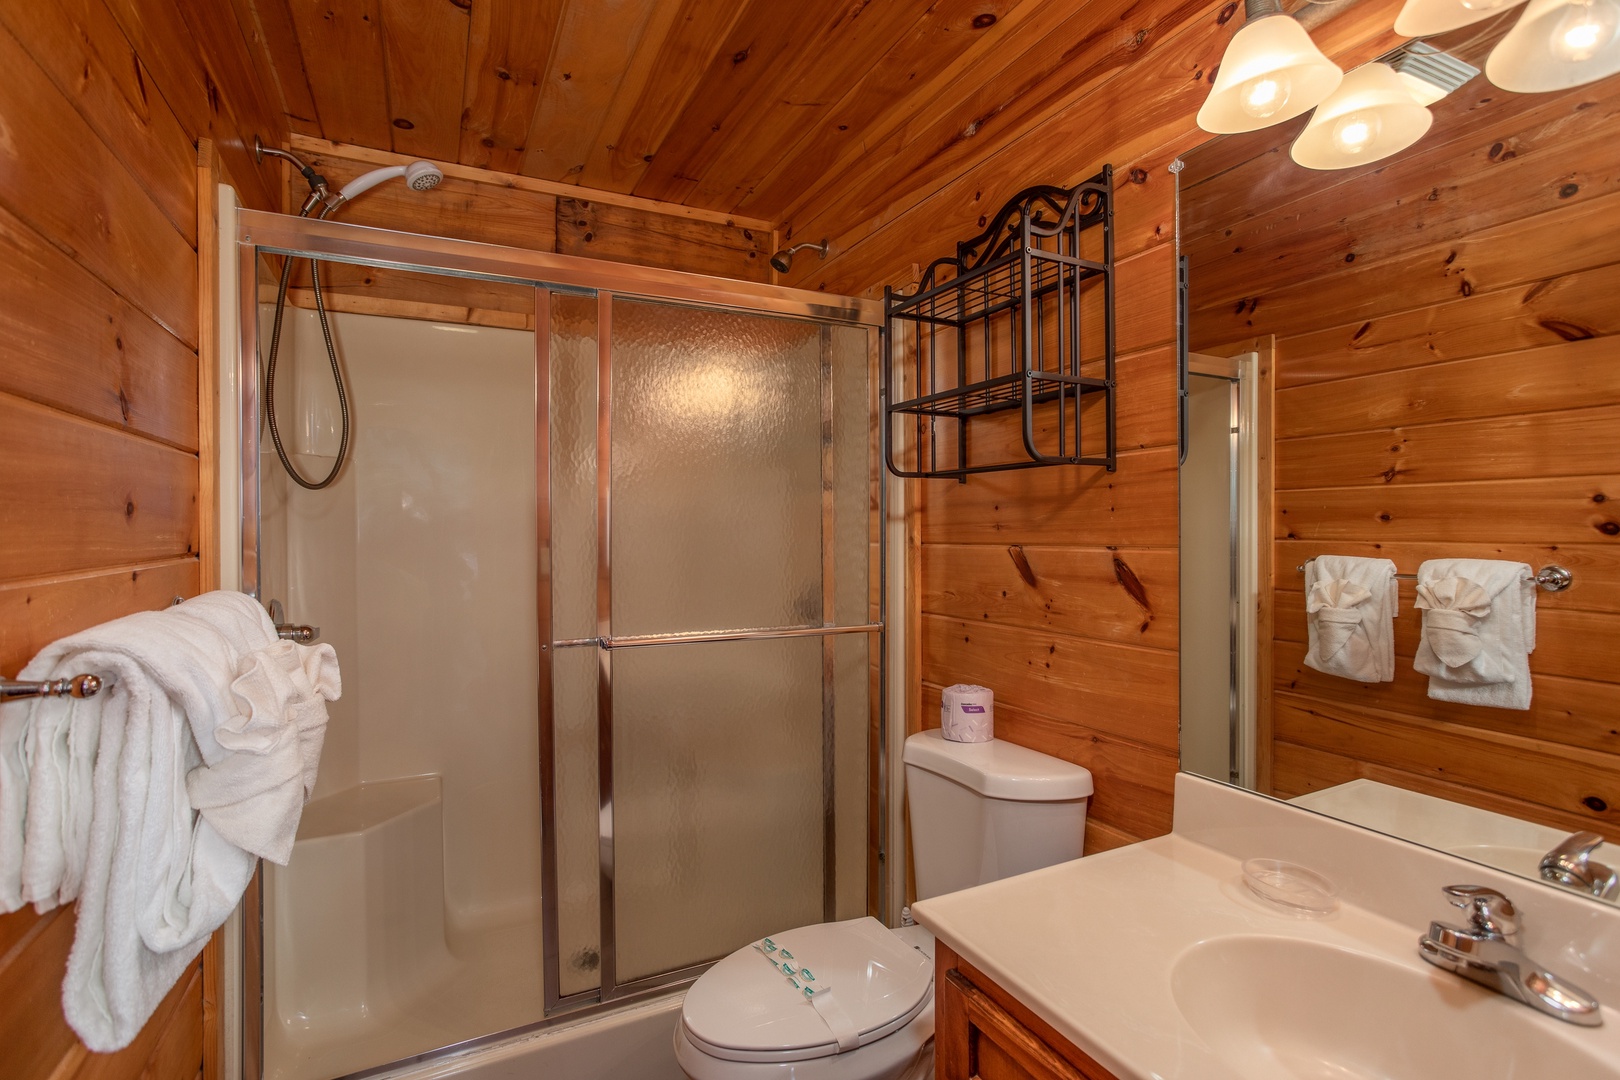 Shower in a bathroom on the main floor at Mountain Music, a 5 bedroom cabin rental located in Pigeon Forge